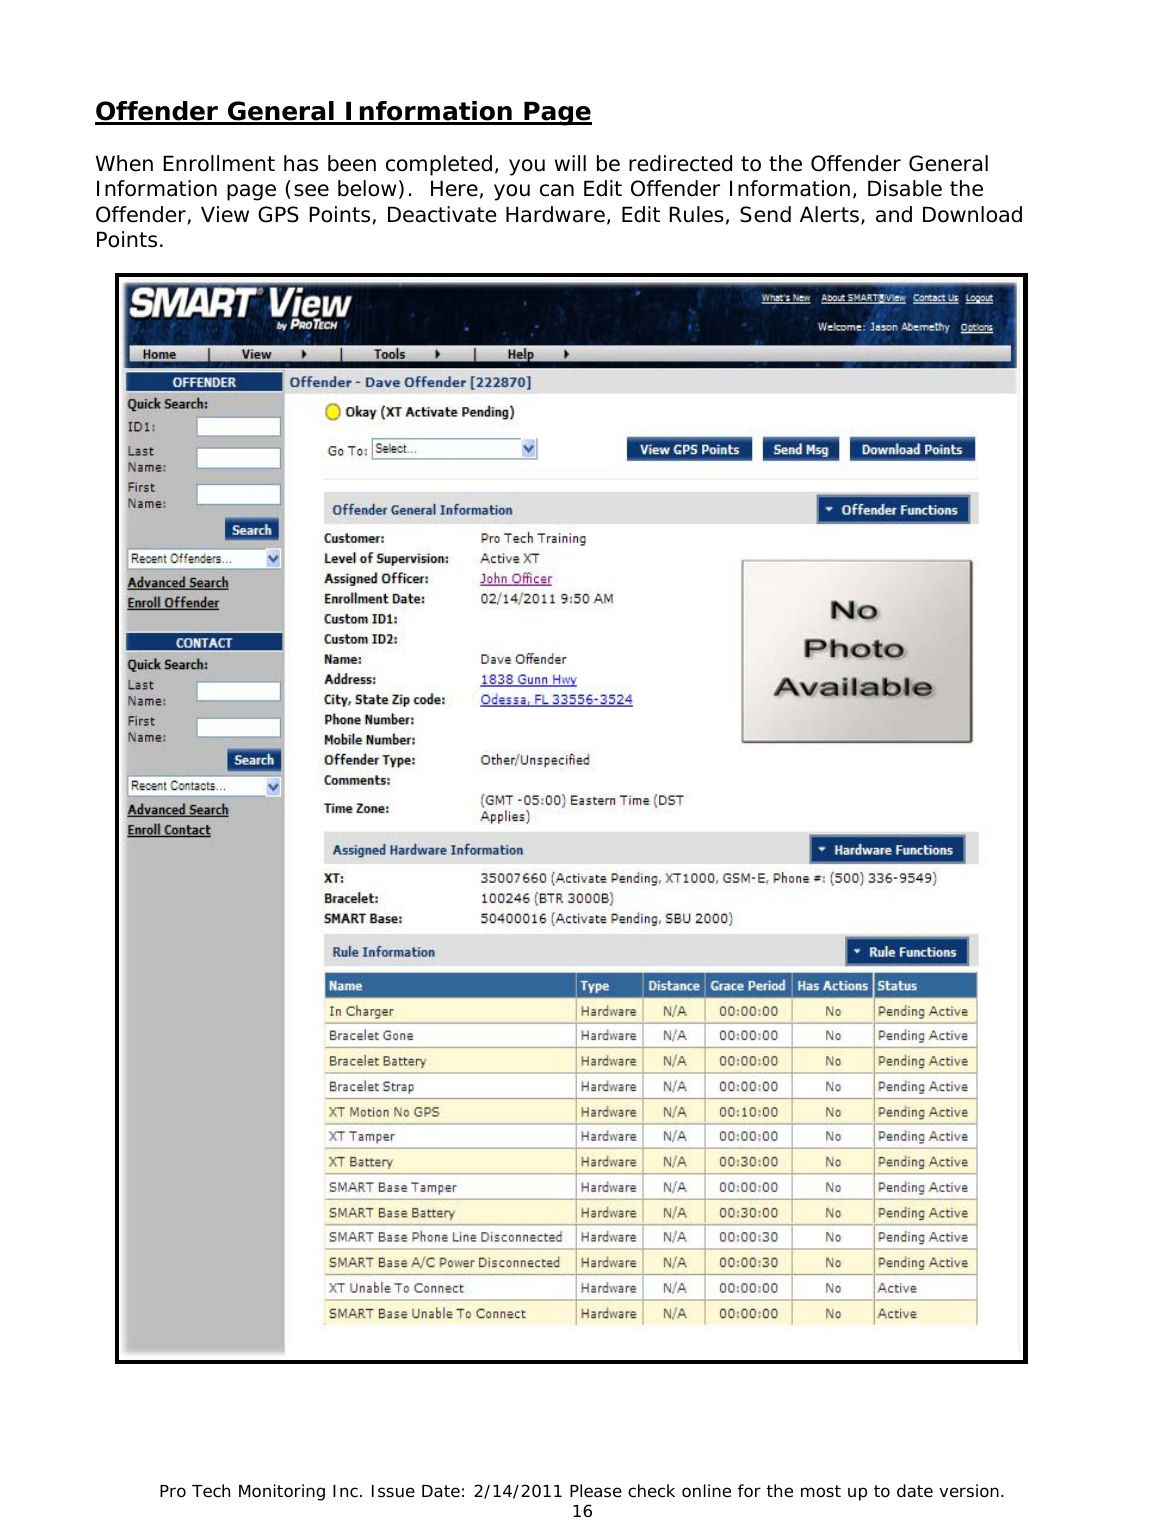 Pro Tech Monitoring Inc. Issue Date: 2/14/2011 Please check online for the most up to date version. 16  Offender General Information Page  When Enrollment has been completed, you will be redirected to the Offender General Information page (see below).  Here, you can Edit Offender Information, Disable the Offender, View GPS Points, Deactivate Hardware, Edit Rules, Send Alerts, and Download Points.   